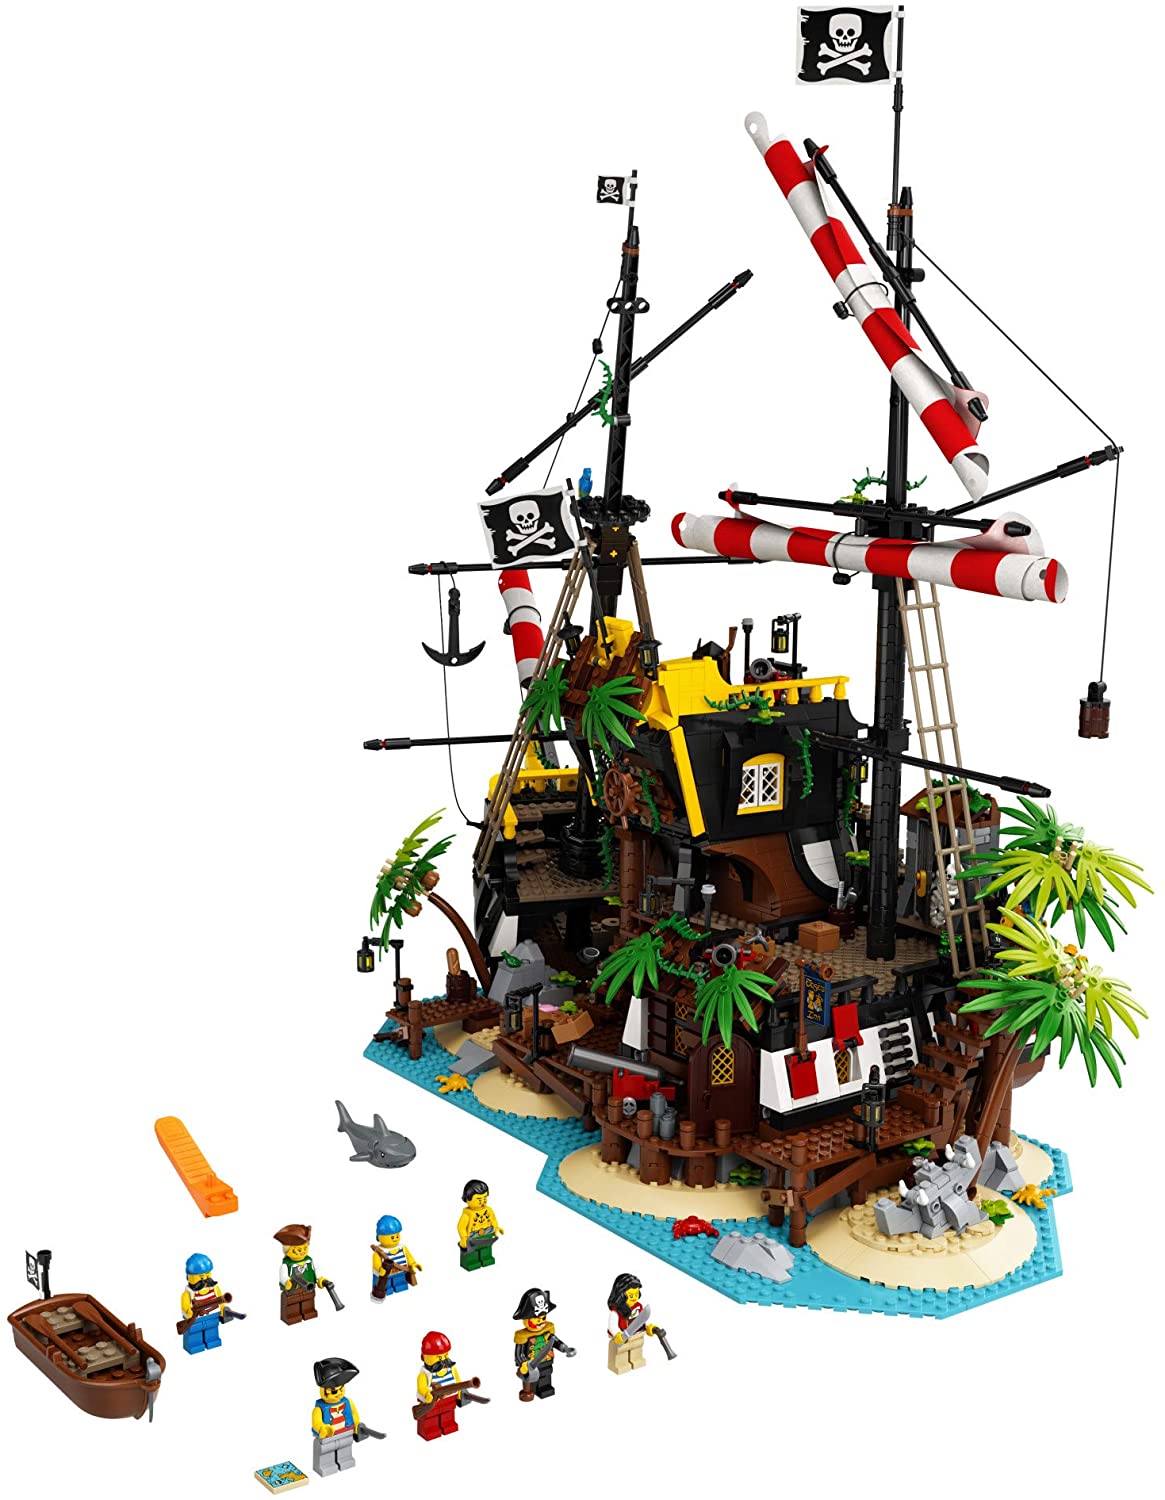 LEGO 6316404 Ideas Pirates of Barracuda Bay Pirate Shipwreck Kit for Play and Display 21322 - image 3 of 8